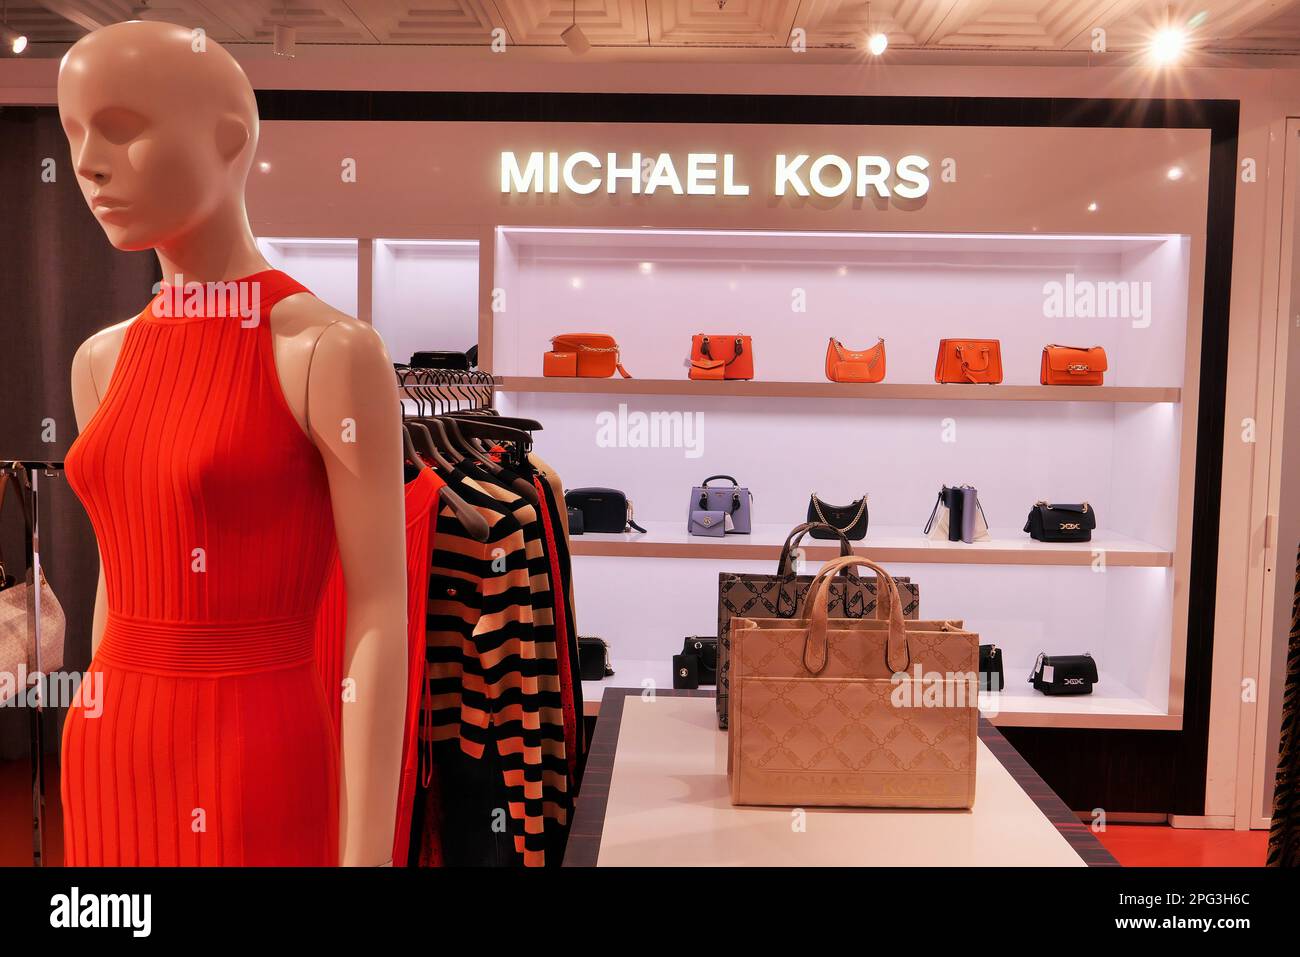 MICHAEL KORS BAGS FOR WOMAN INSIDE THE FASHION STORE Stock Photo